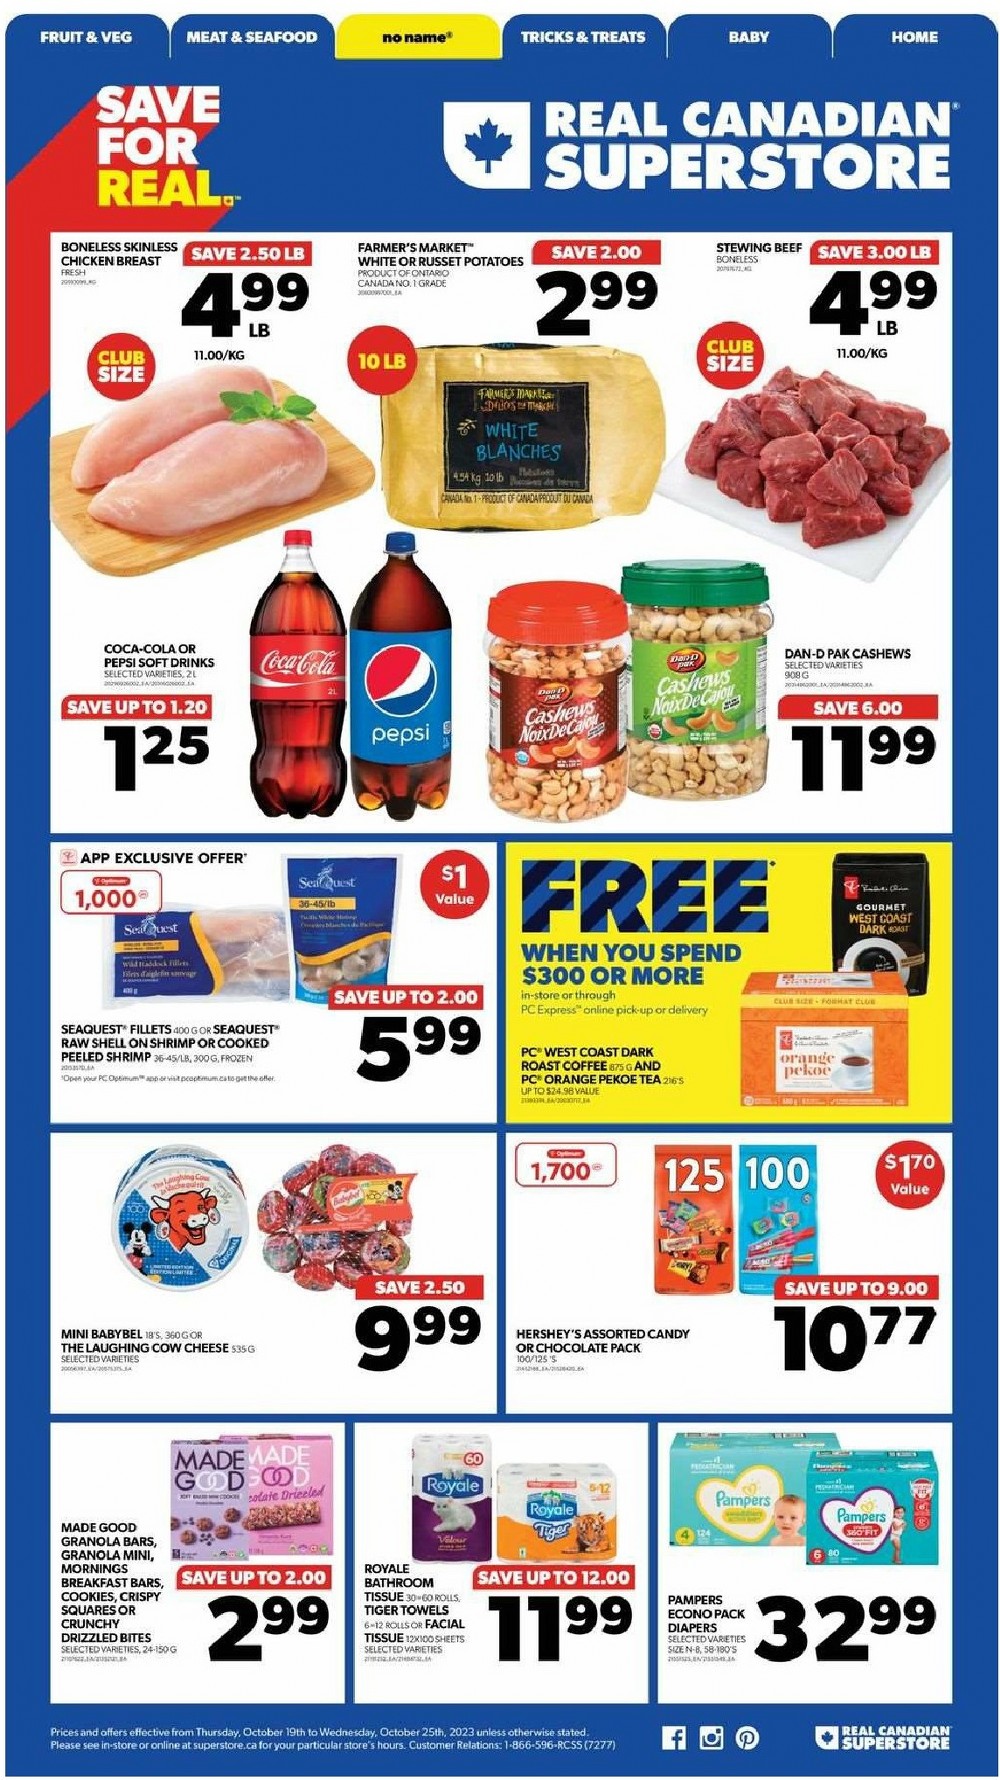 Real Canadian Superstore Flyer April 21 to May 11, 2022 1 – real canadian on flyer 19 25